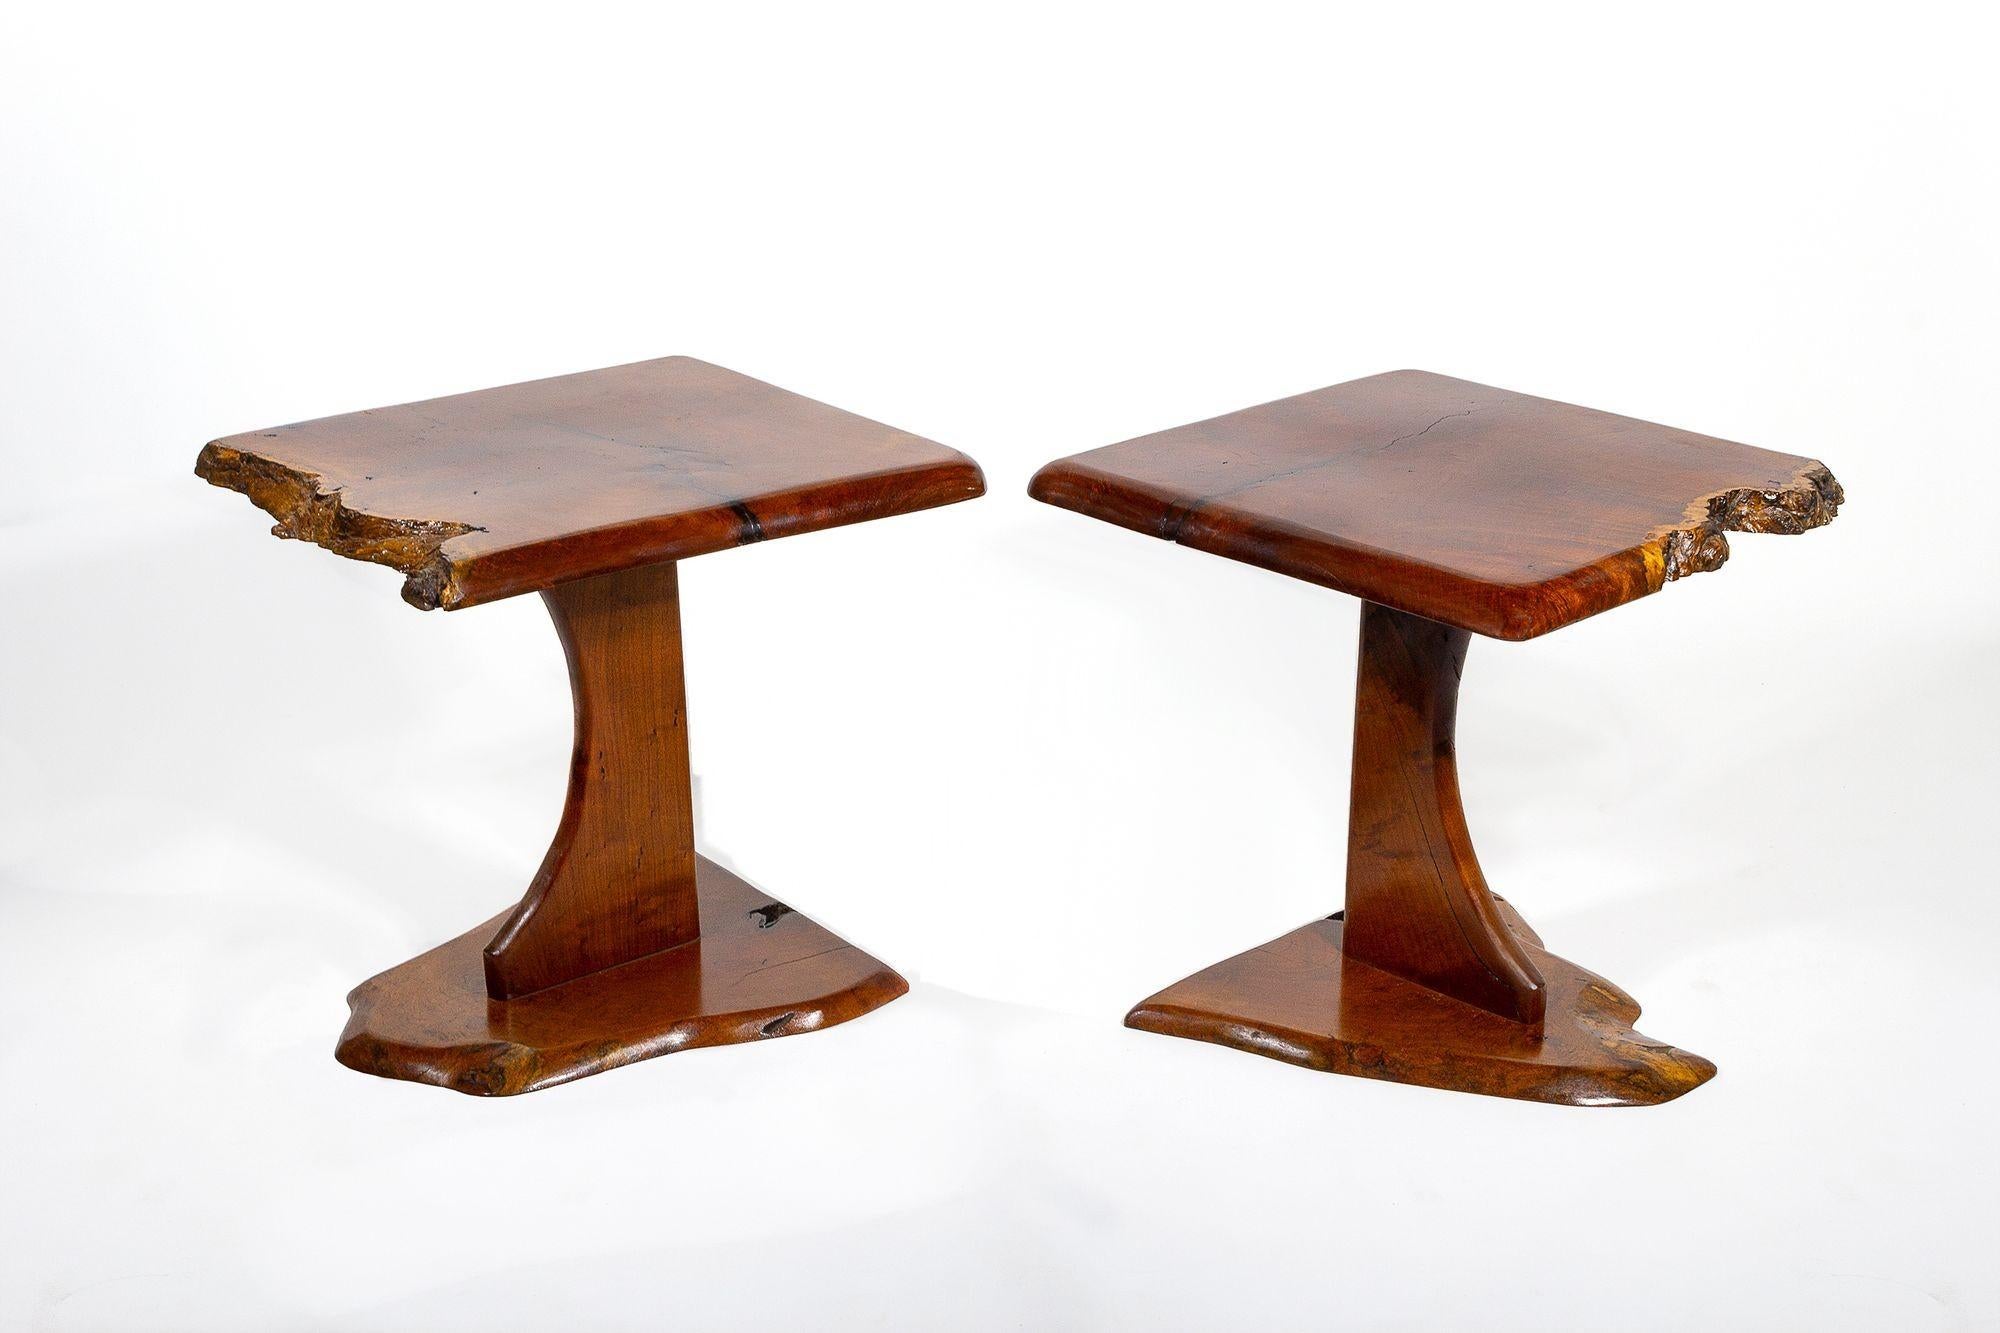 The price is for the set of 3.
 
Beautifully crafted set of three studio-made free edge tables commissioned by an important Dallas Collector and bench-made by locally renowned San Antonio woodworker John David Sackett from regionally sourced